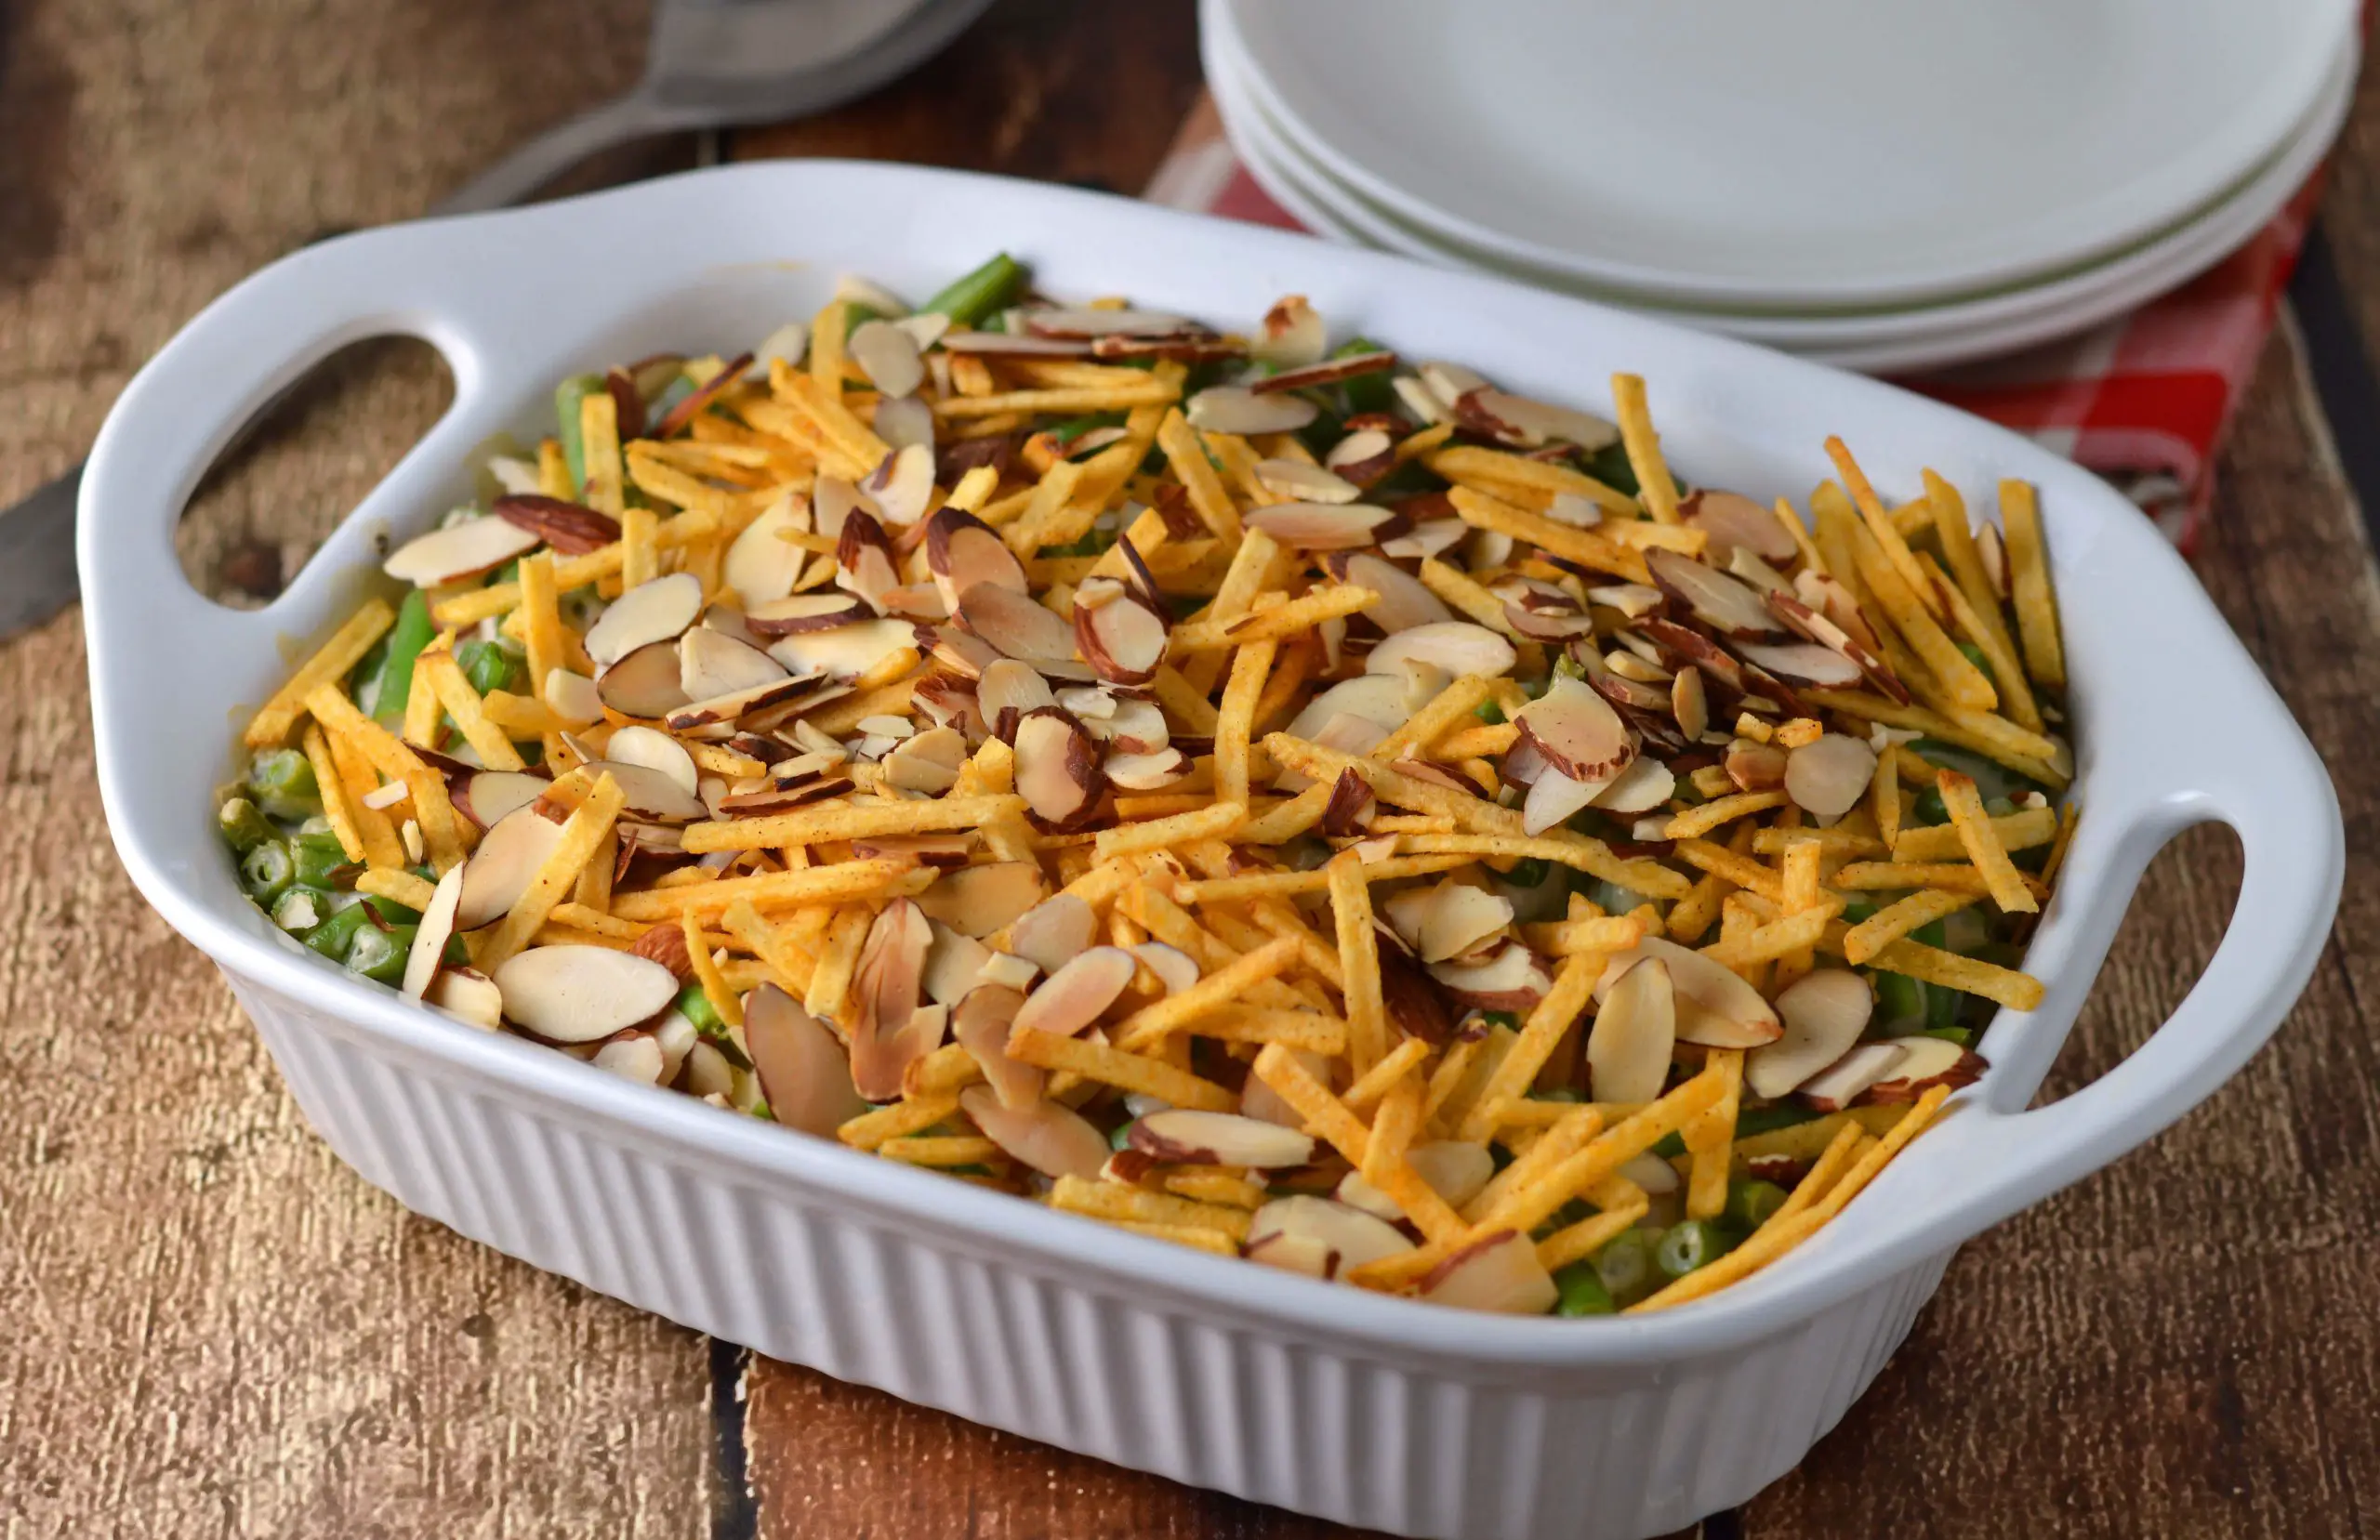 Creamy green bean casserole with Campbell